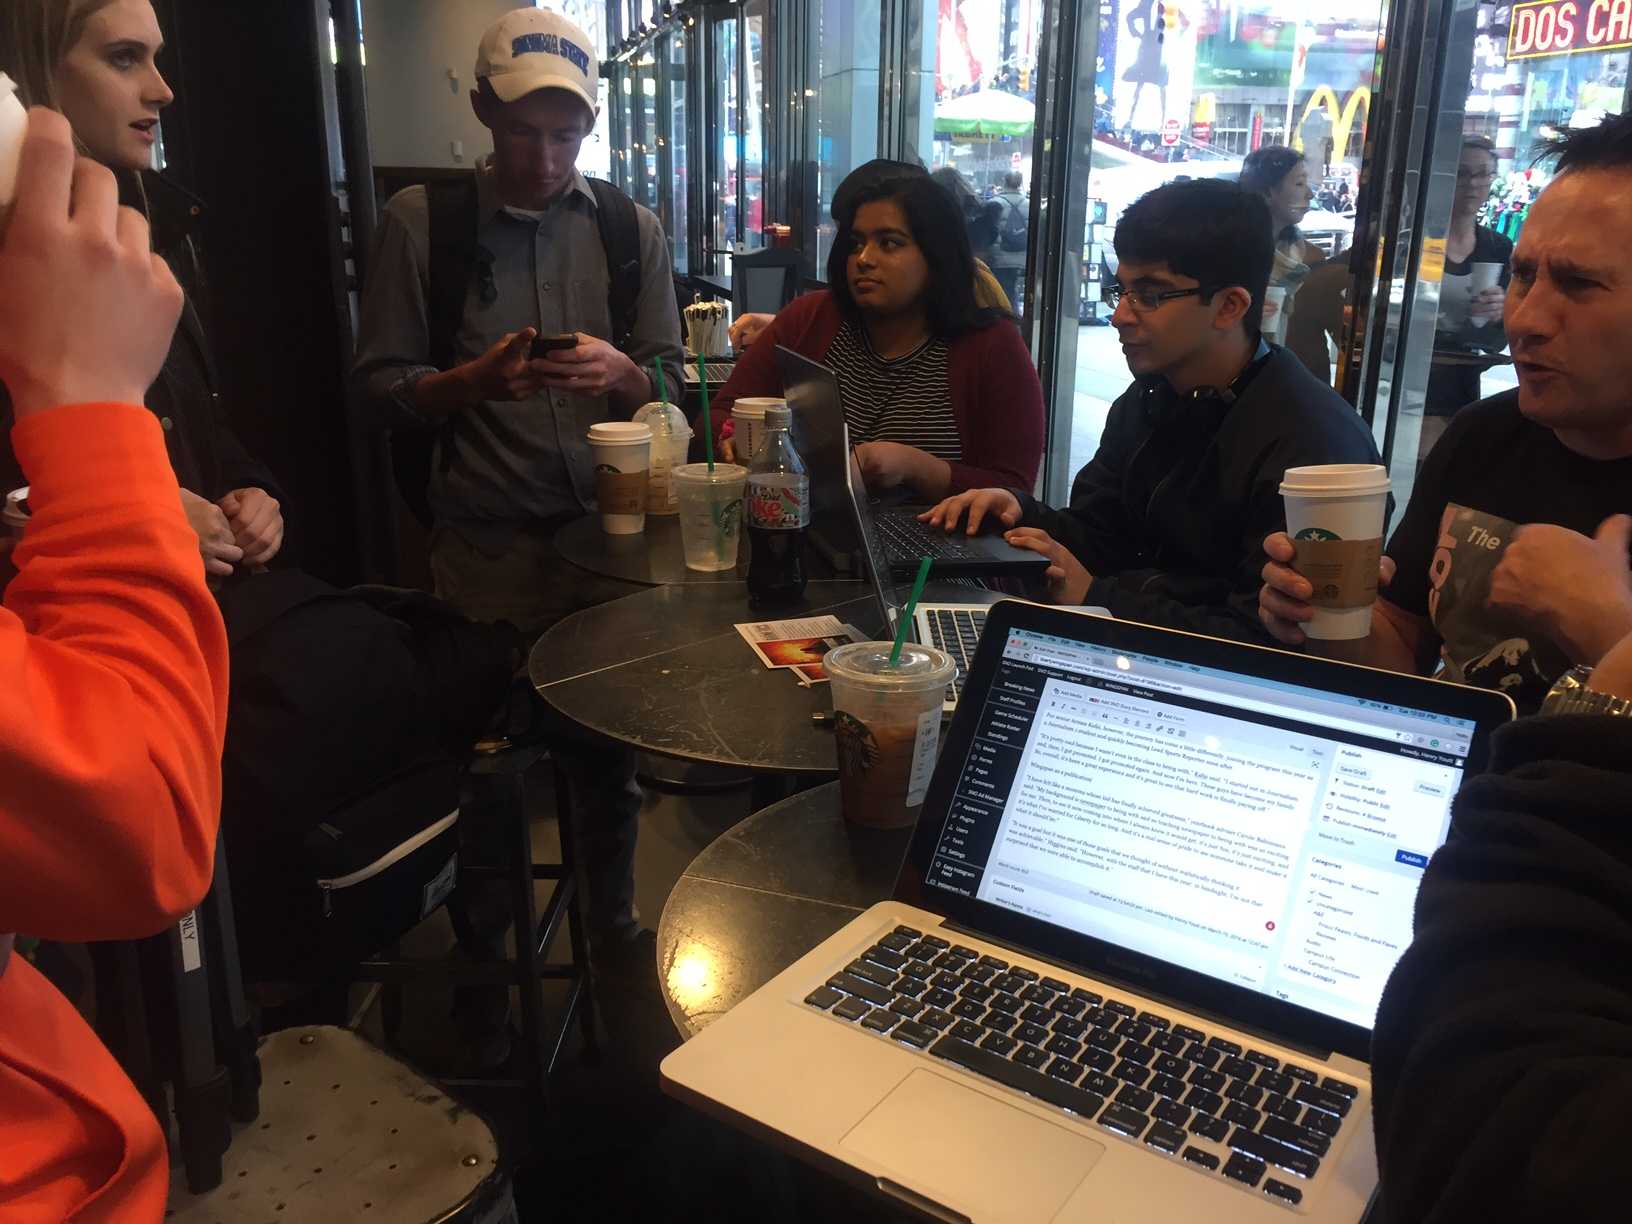 Students settled down in the Times Square Starbucks to work on content to post for the remainder of the week.